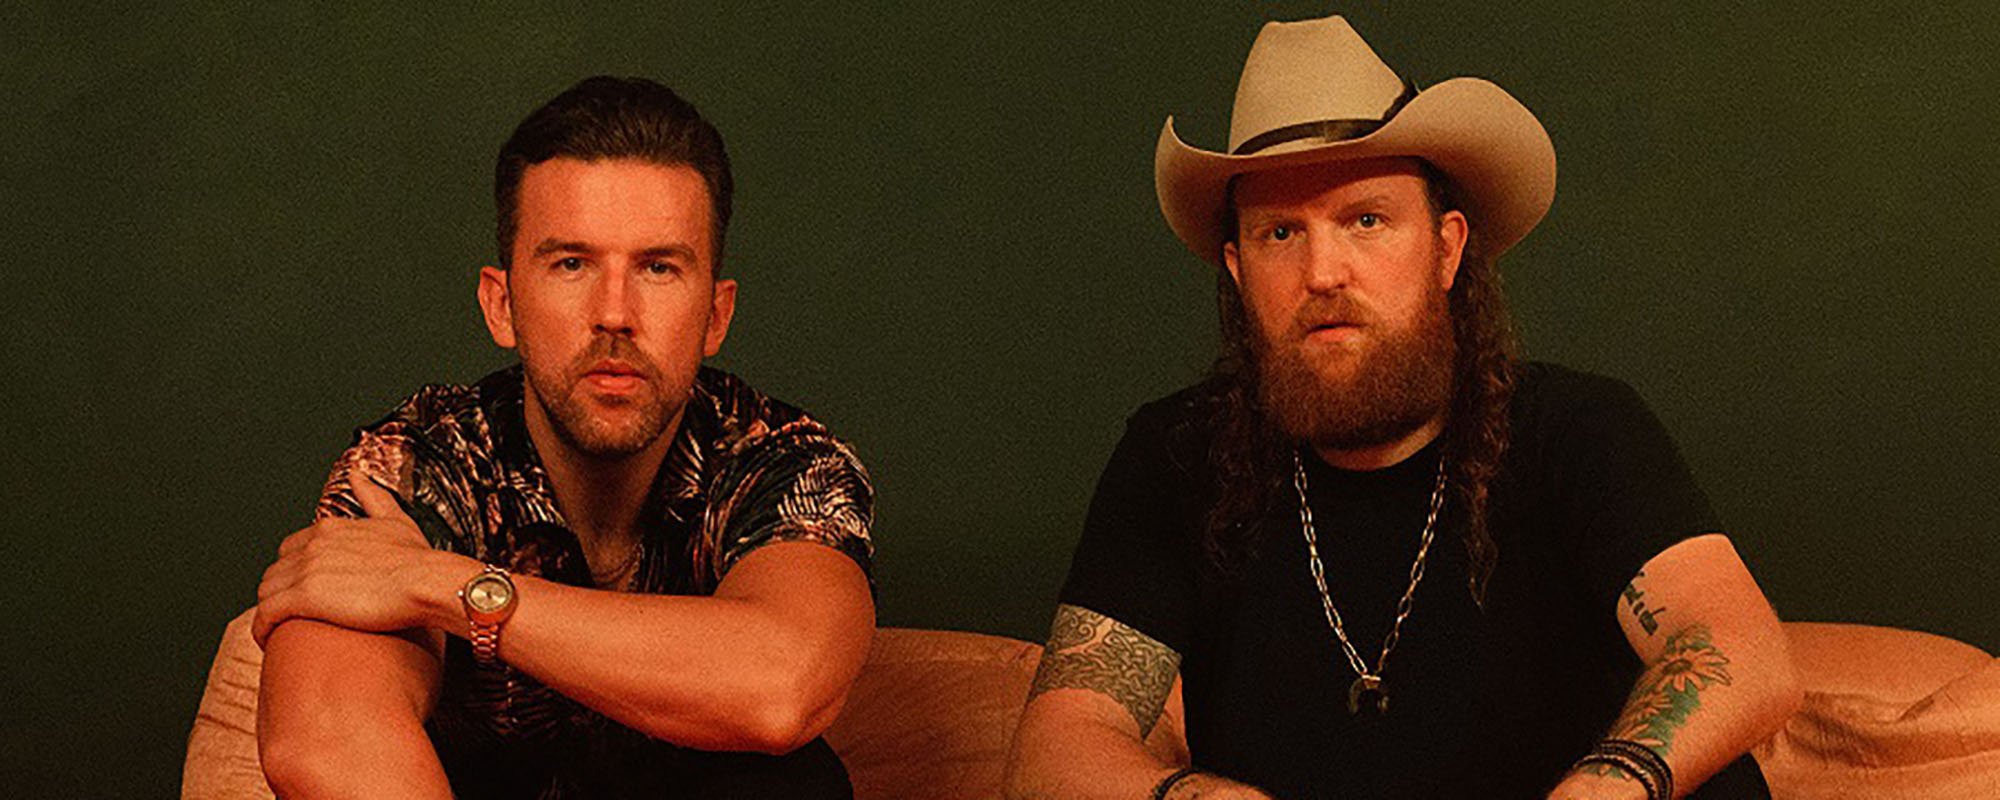 The Meaning Behind “It Ain’t My Fault” by Brothers Osborne